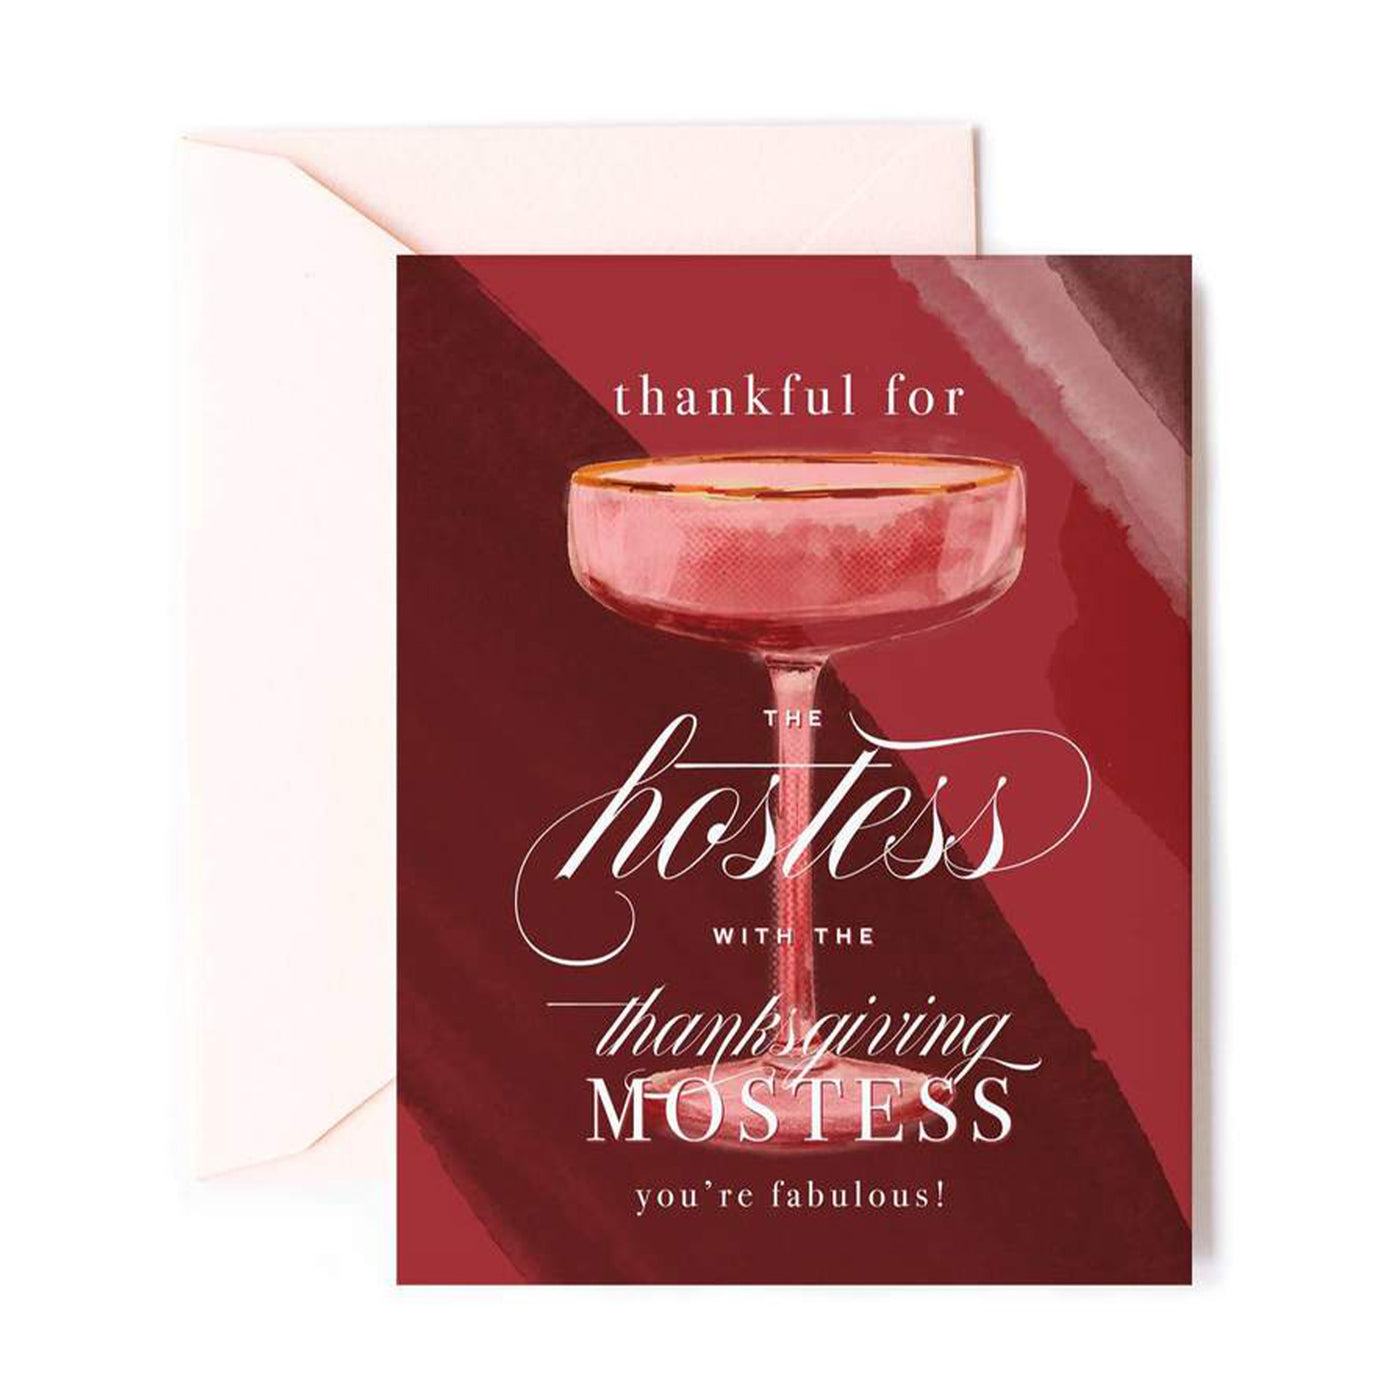 Thanksgiving Hostess with the Mostess Greeting Card